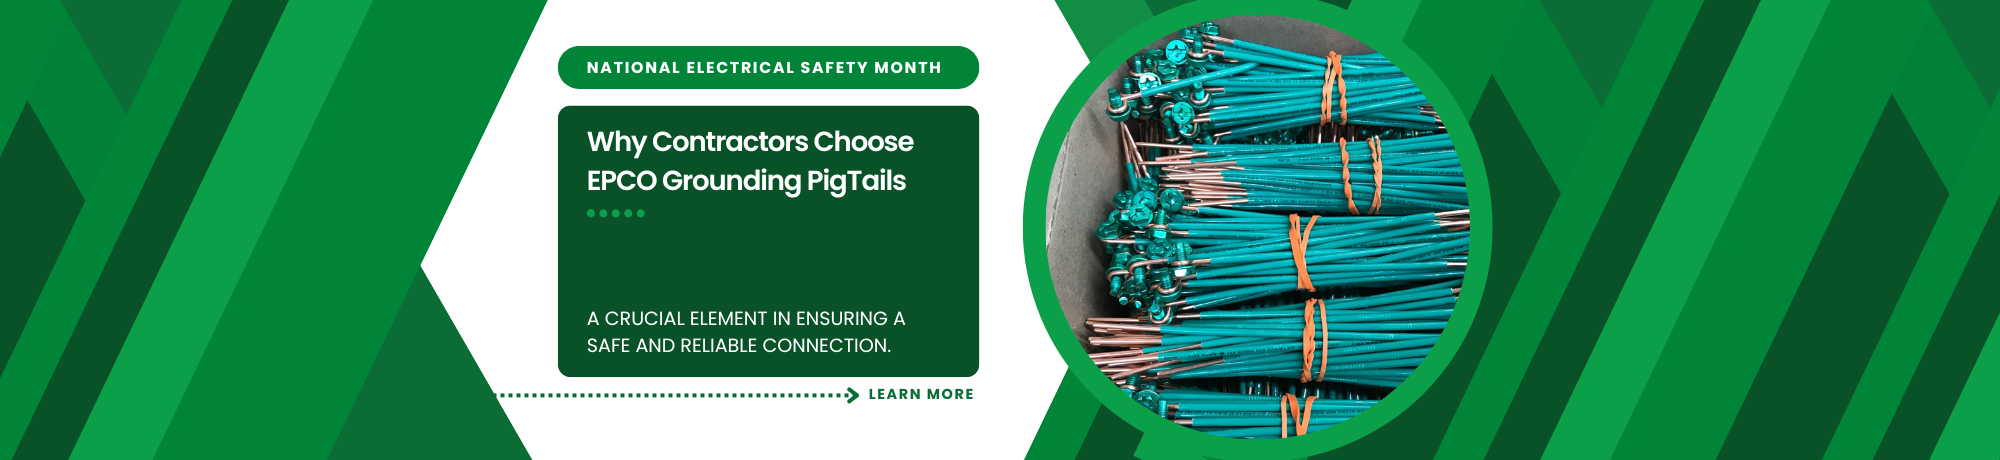 ELECTRICAL SAFETY BANNER_PIGTAILS